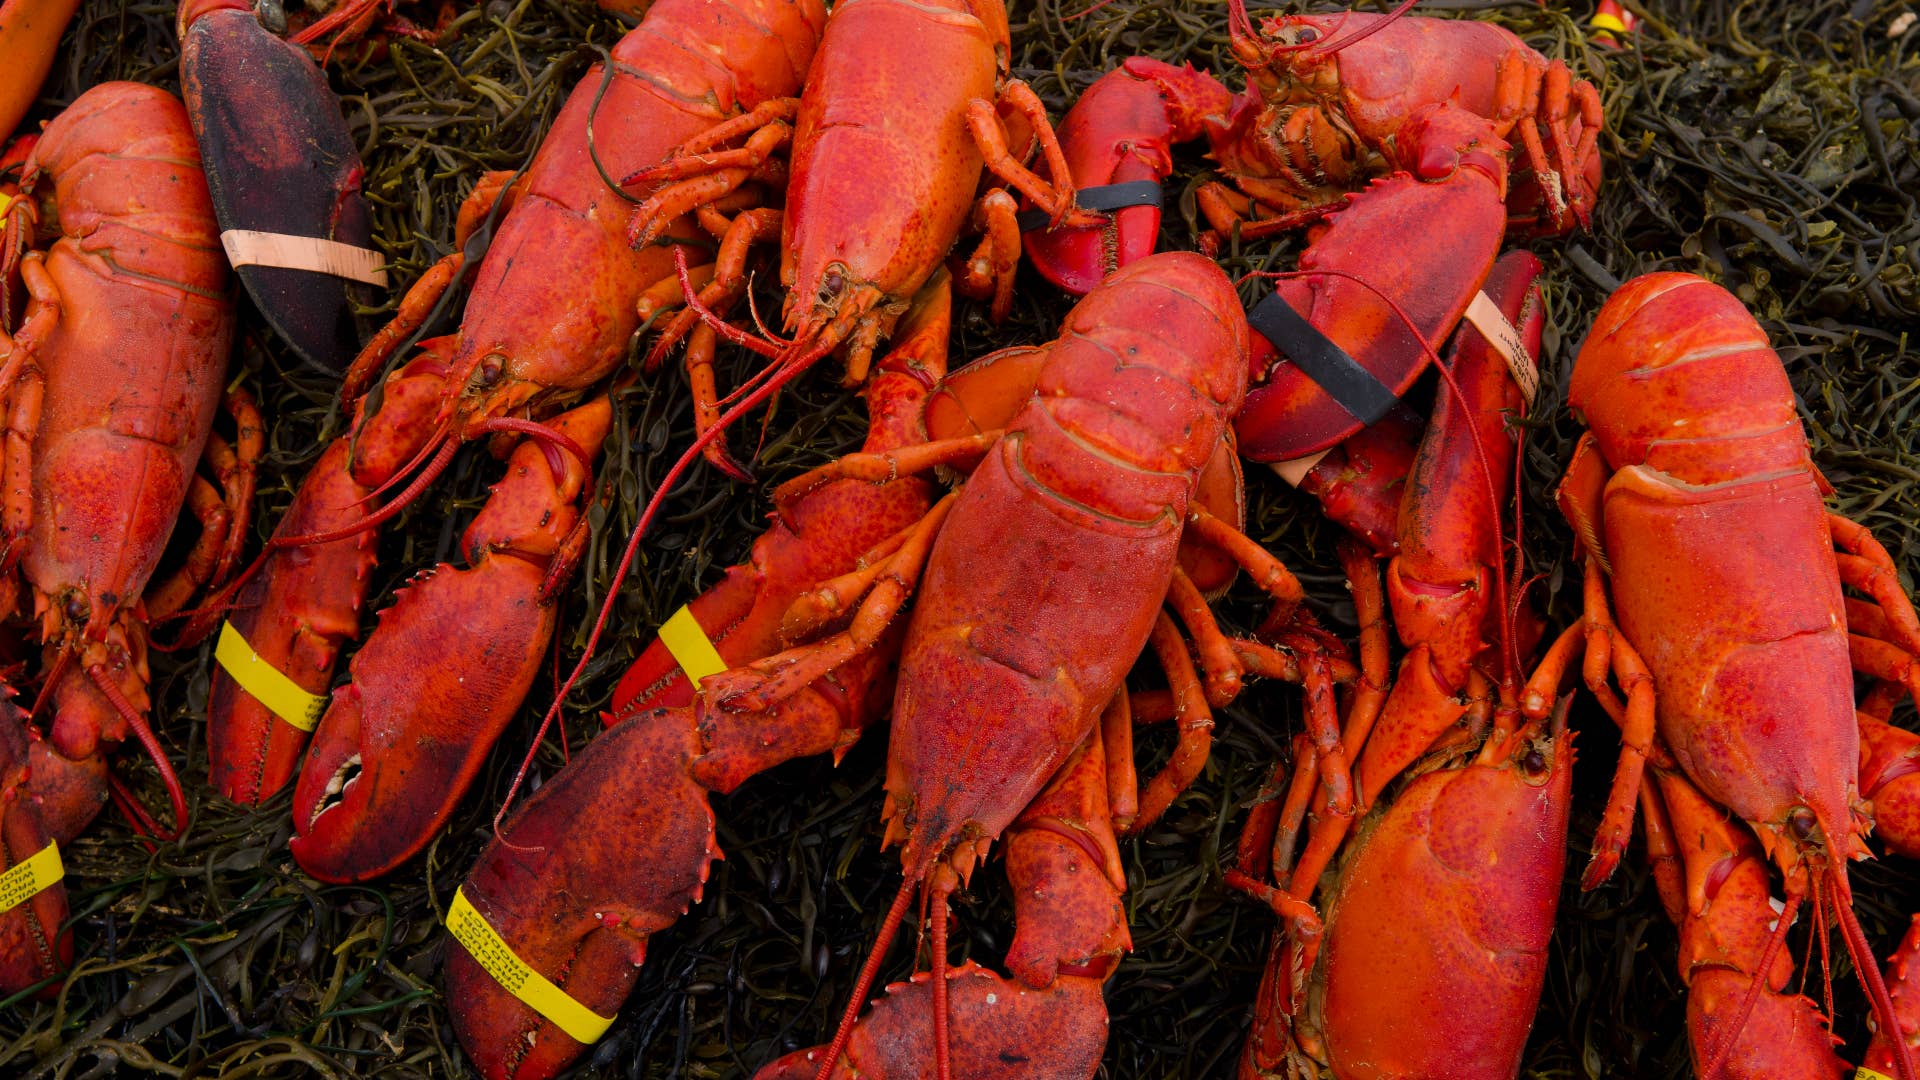 Lobster bake on beach near Rockland Maine with hot lobsters on seaweed for tourists ready to eat outdoors adventure.